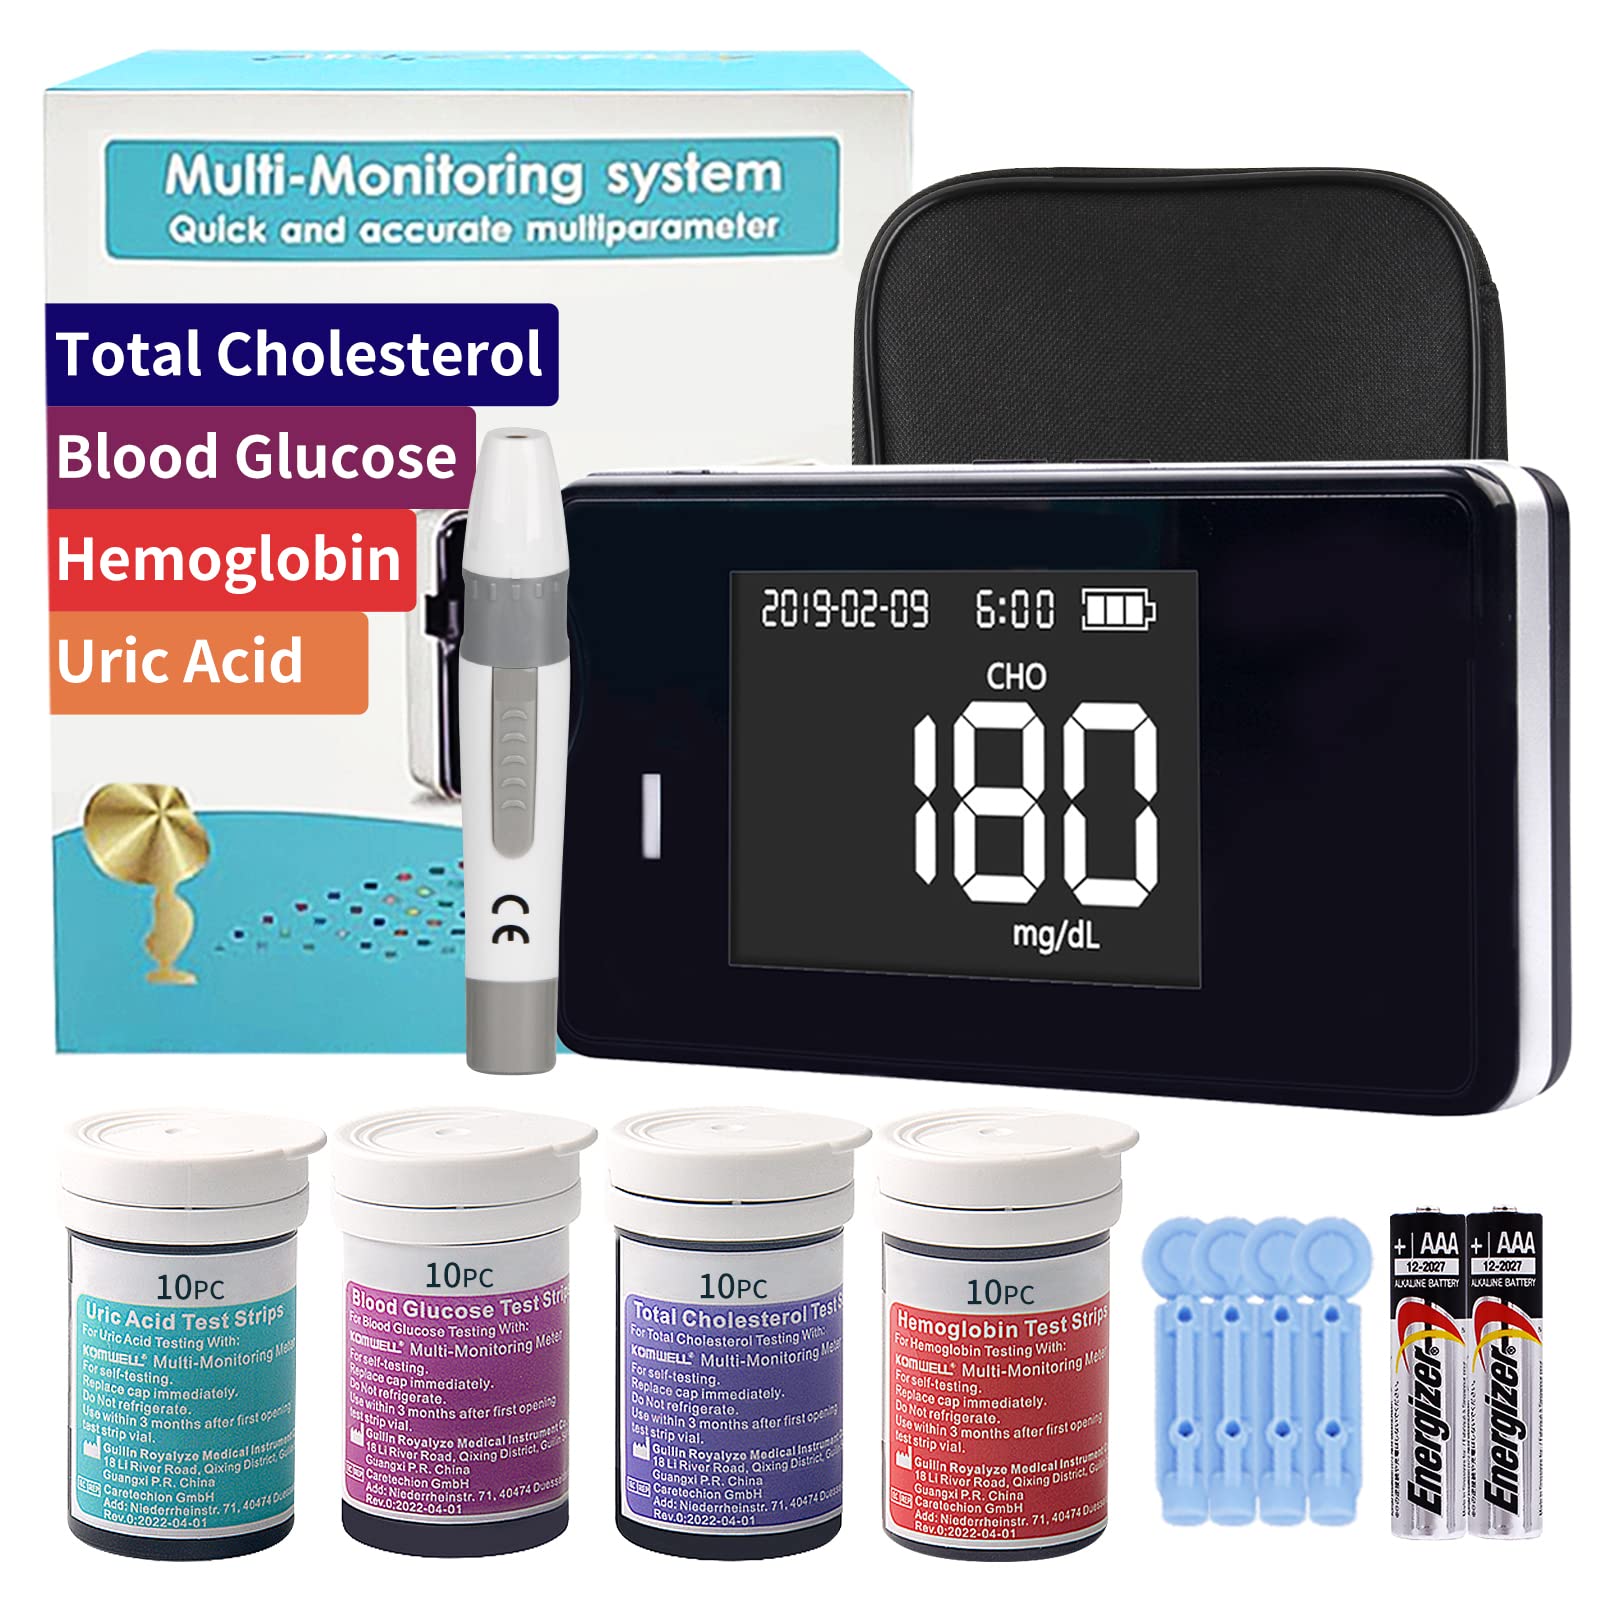 Accu-Answer 4 in 1 Hemoglobin Test Meter Kit Hemoglobin Tester Cholesterol Test  Kit Uric Acid Test Kit 40 Test Strips Total Included. No Code Need Accurate  and Fast